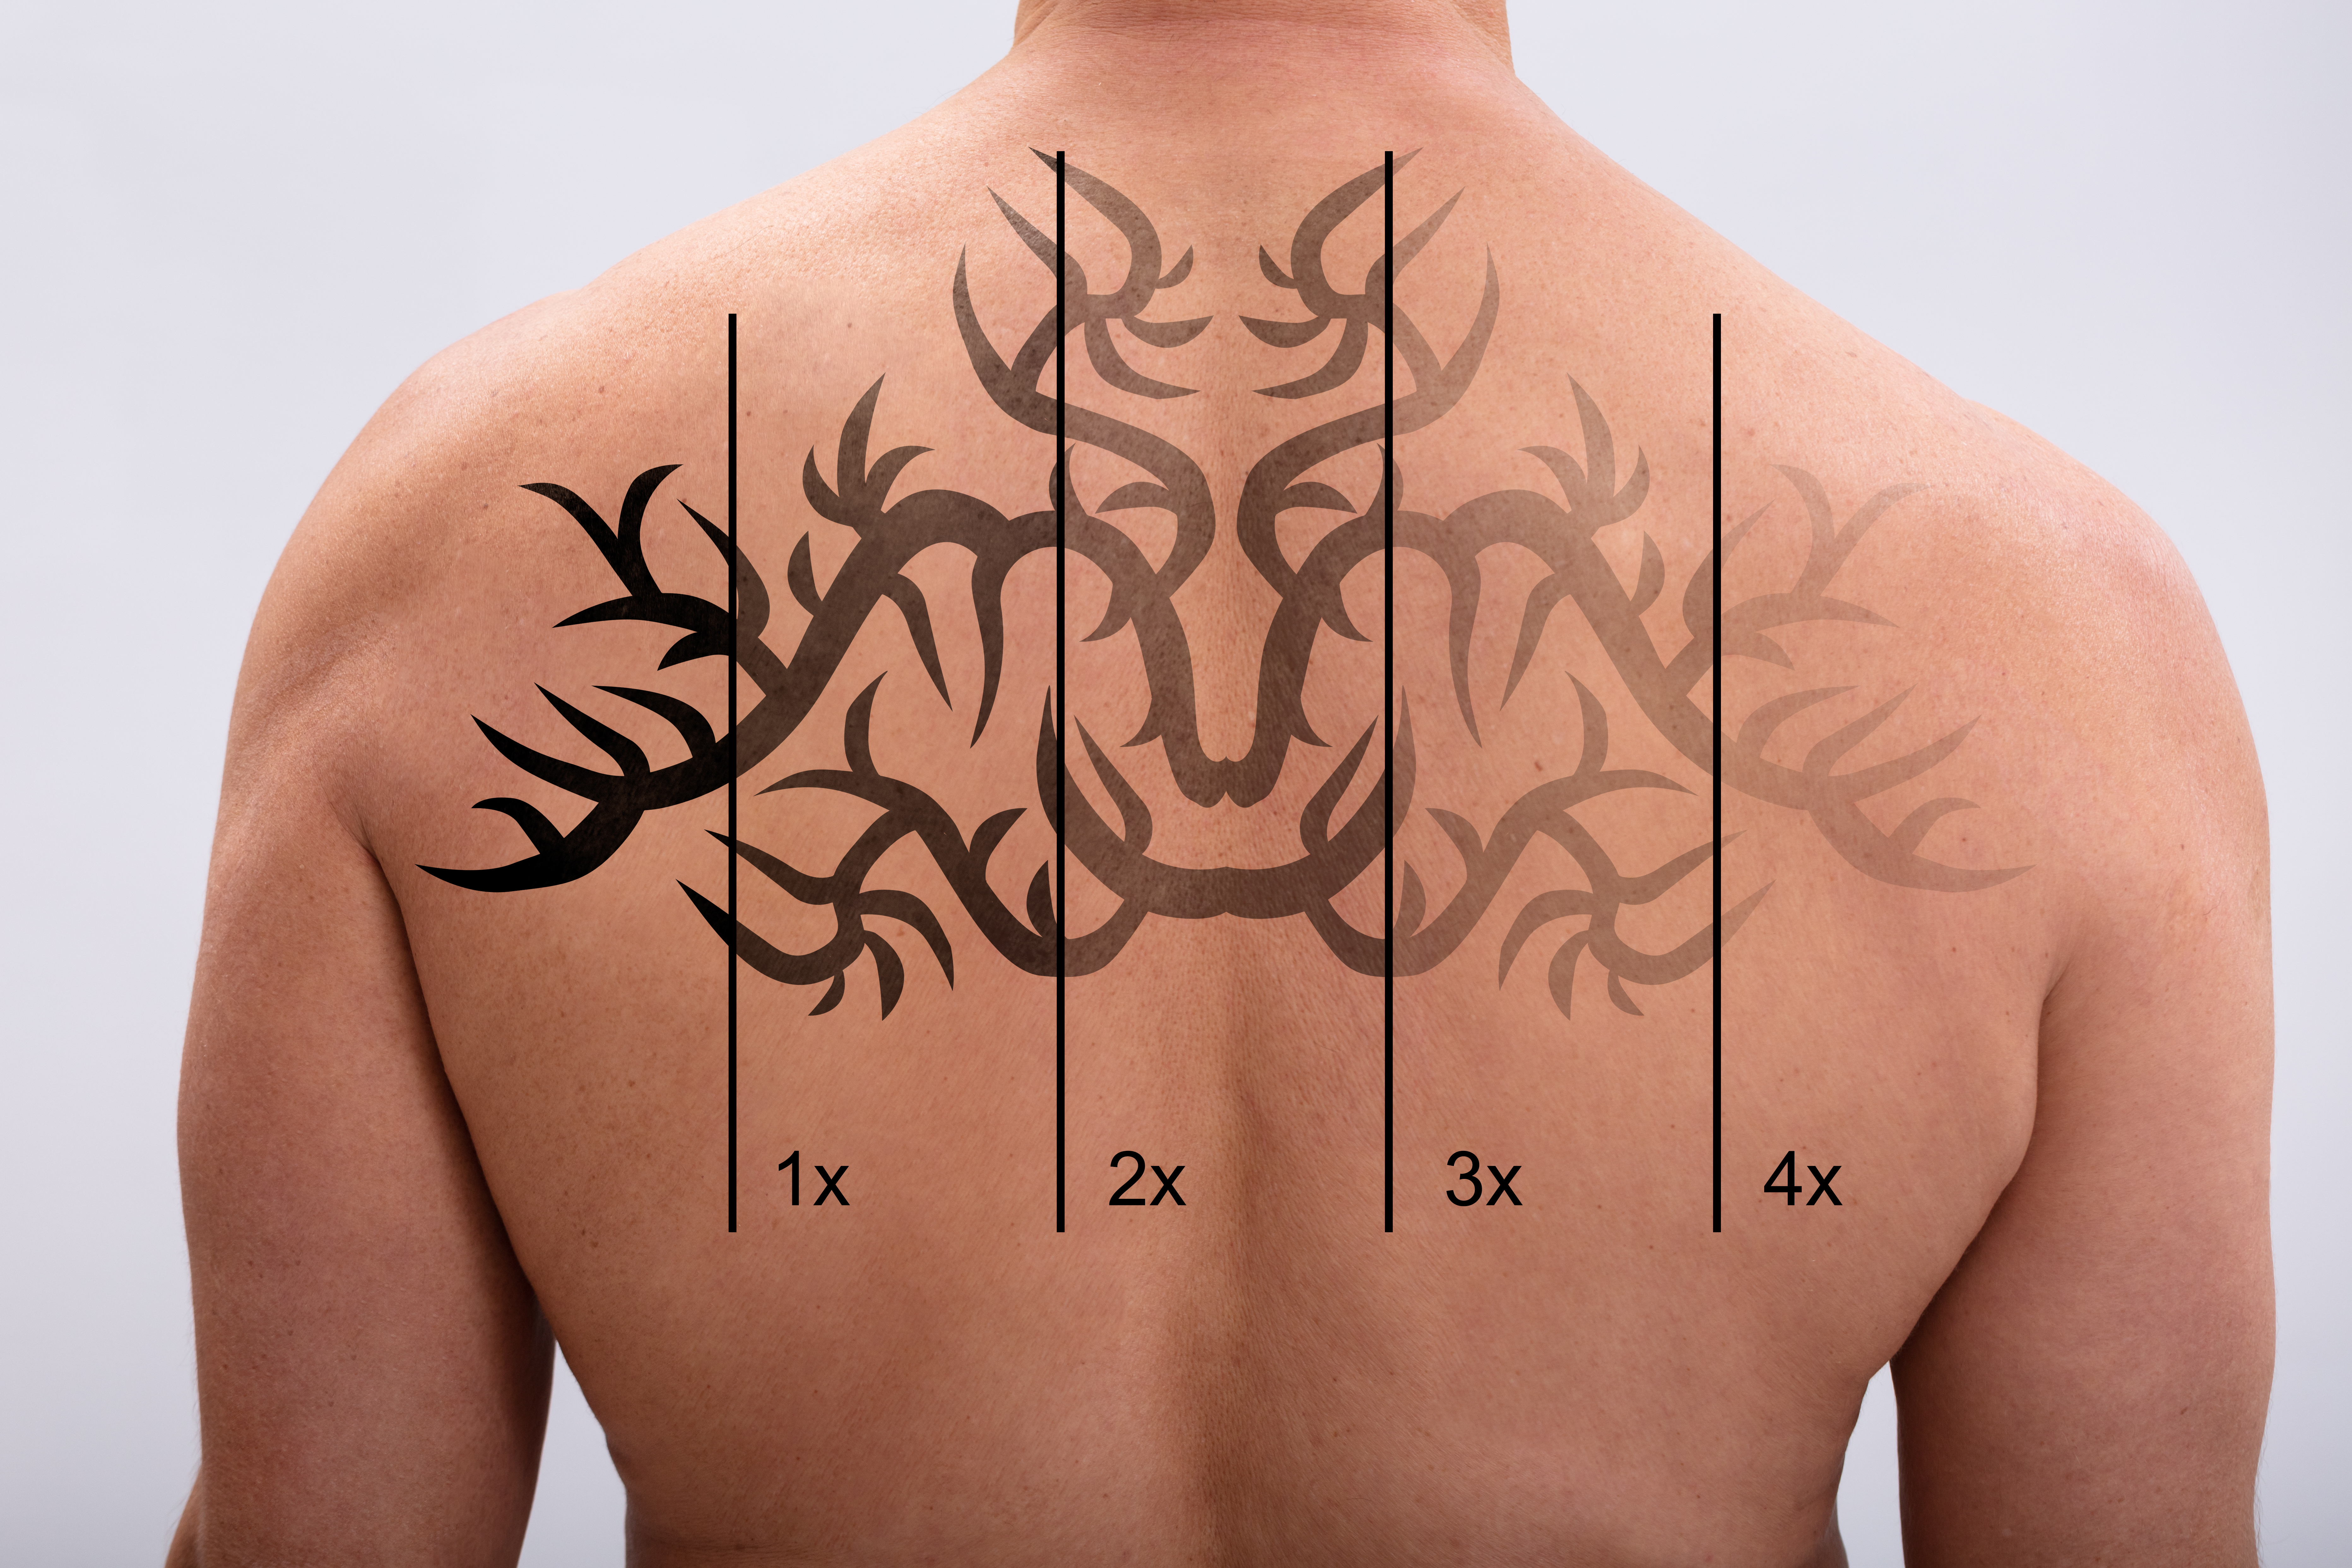 Tattoo Removal Process Pain  Cost Everything You Need To Know